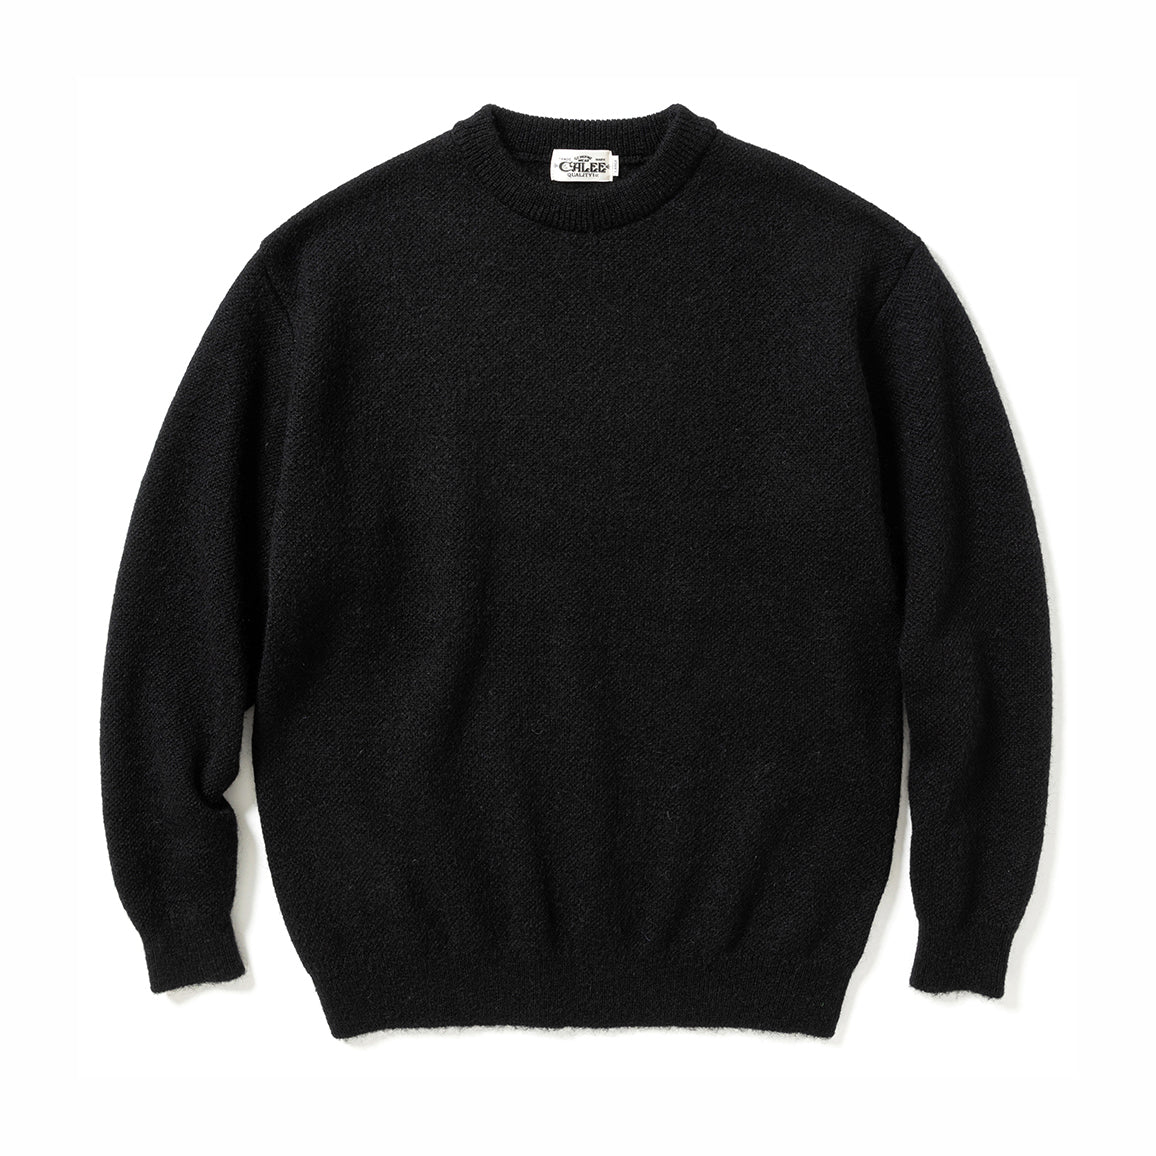 7 GAUGE JACQUARD MOHAIR CREW NECK KNIT SWEATER - calee-official